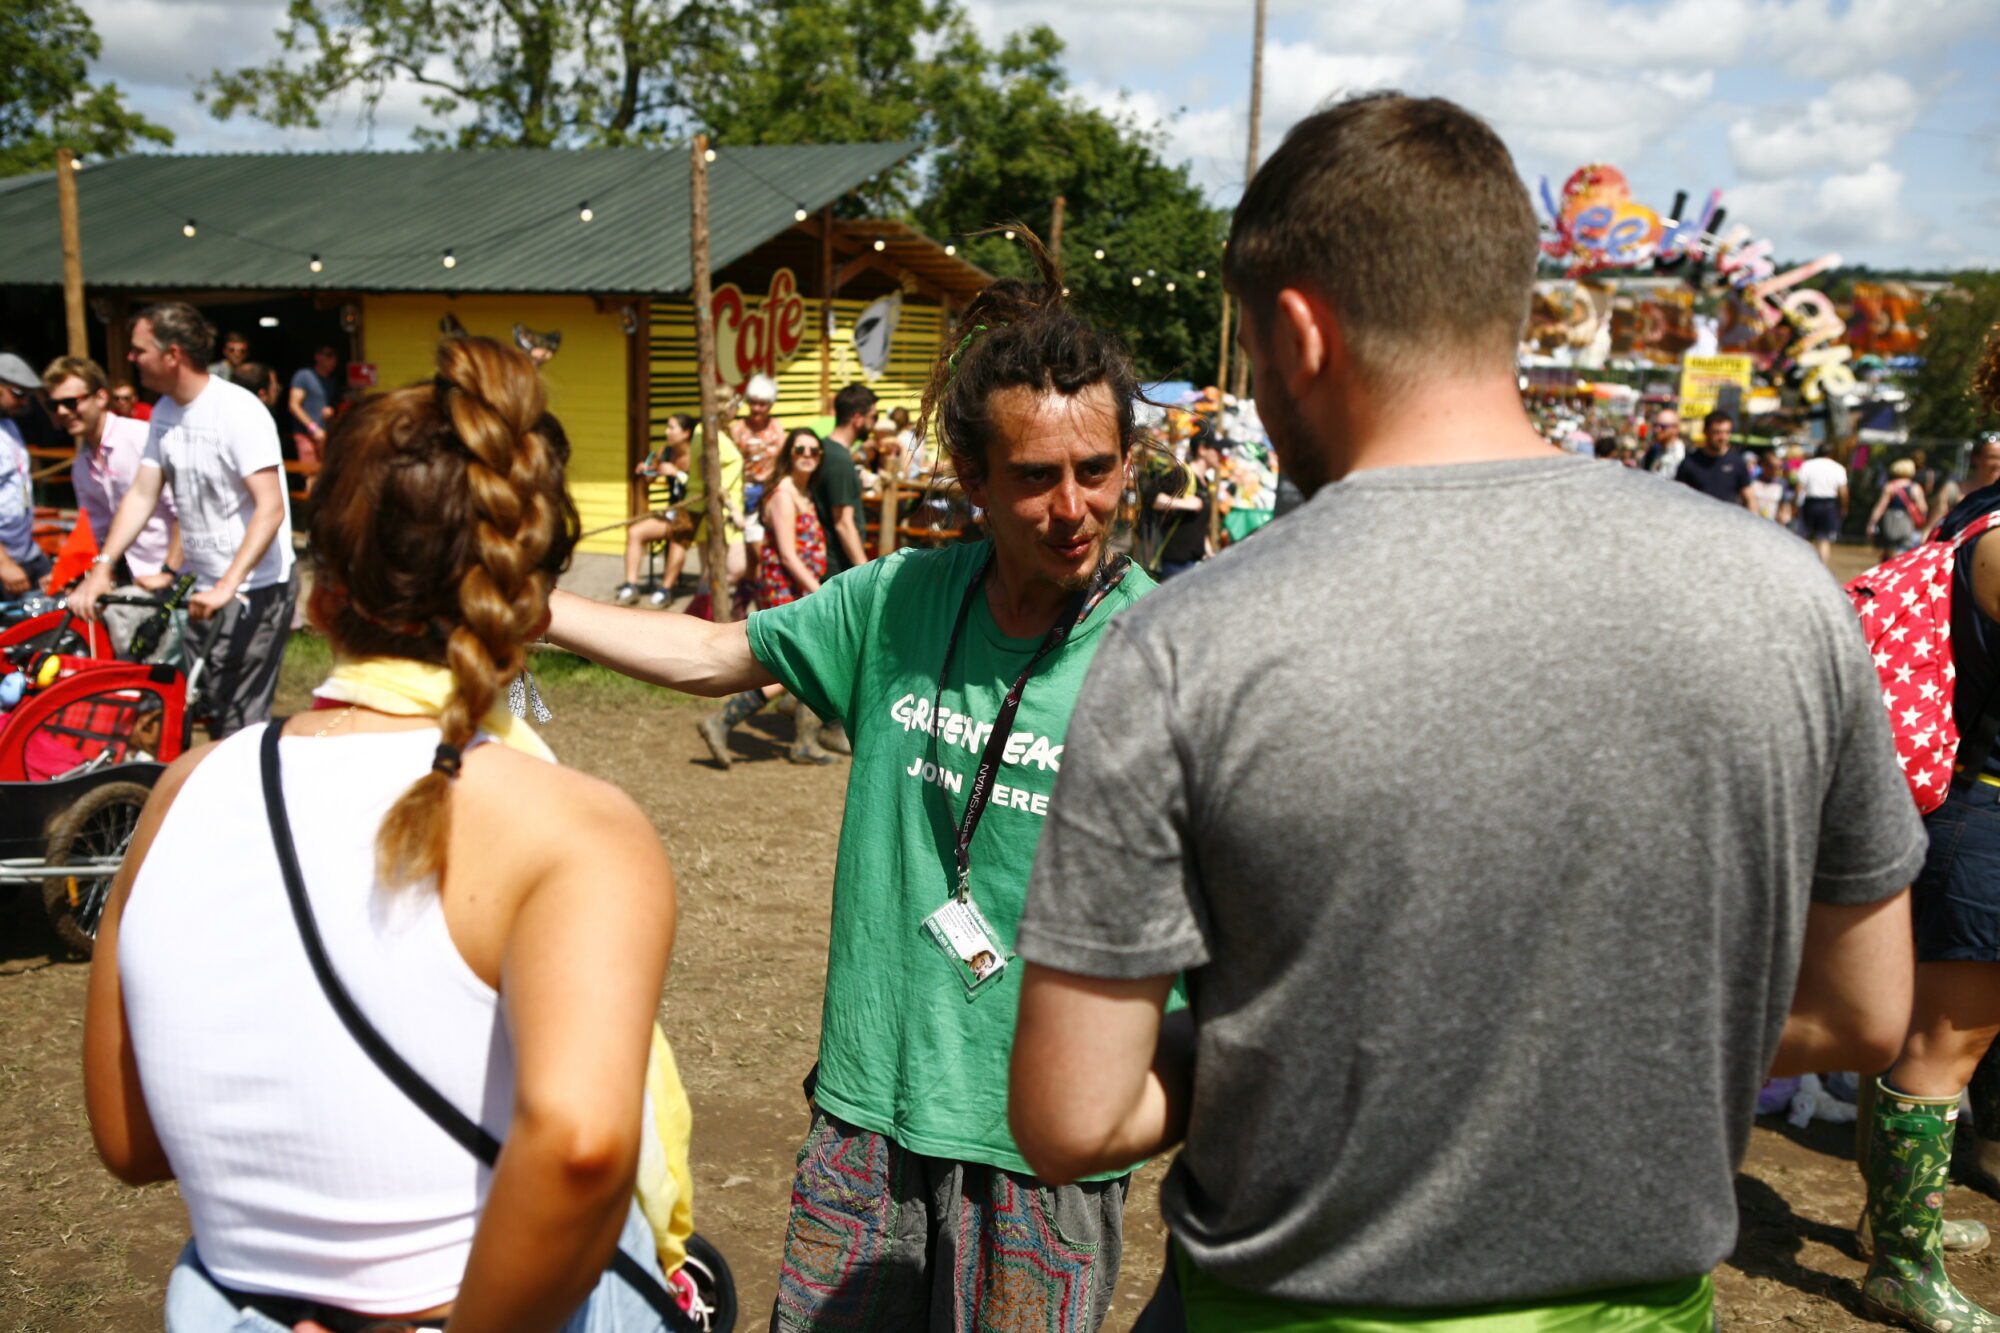 A Greenpeace volunteer speaks to the public at a festival